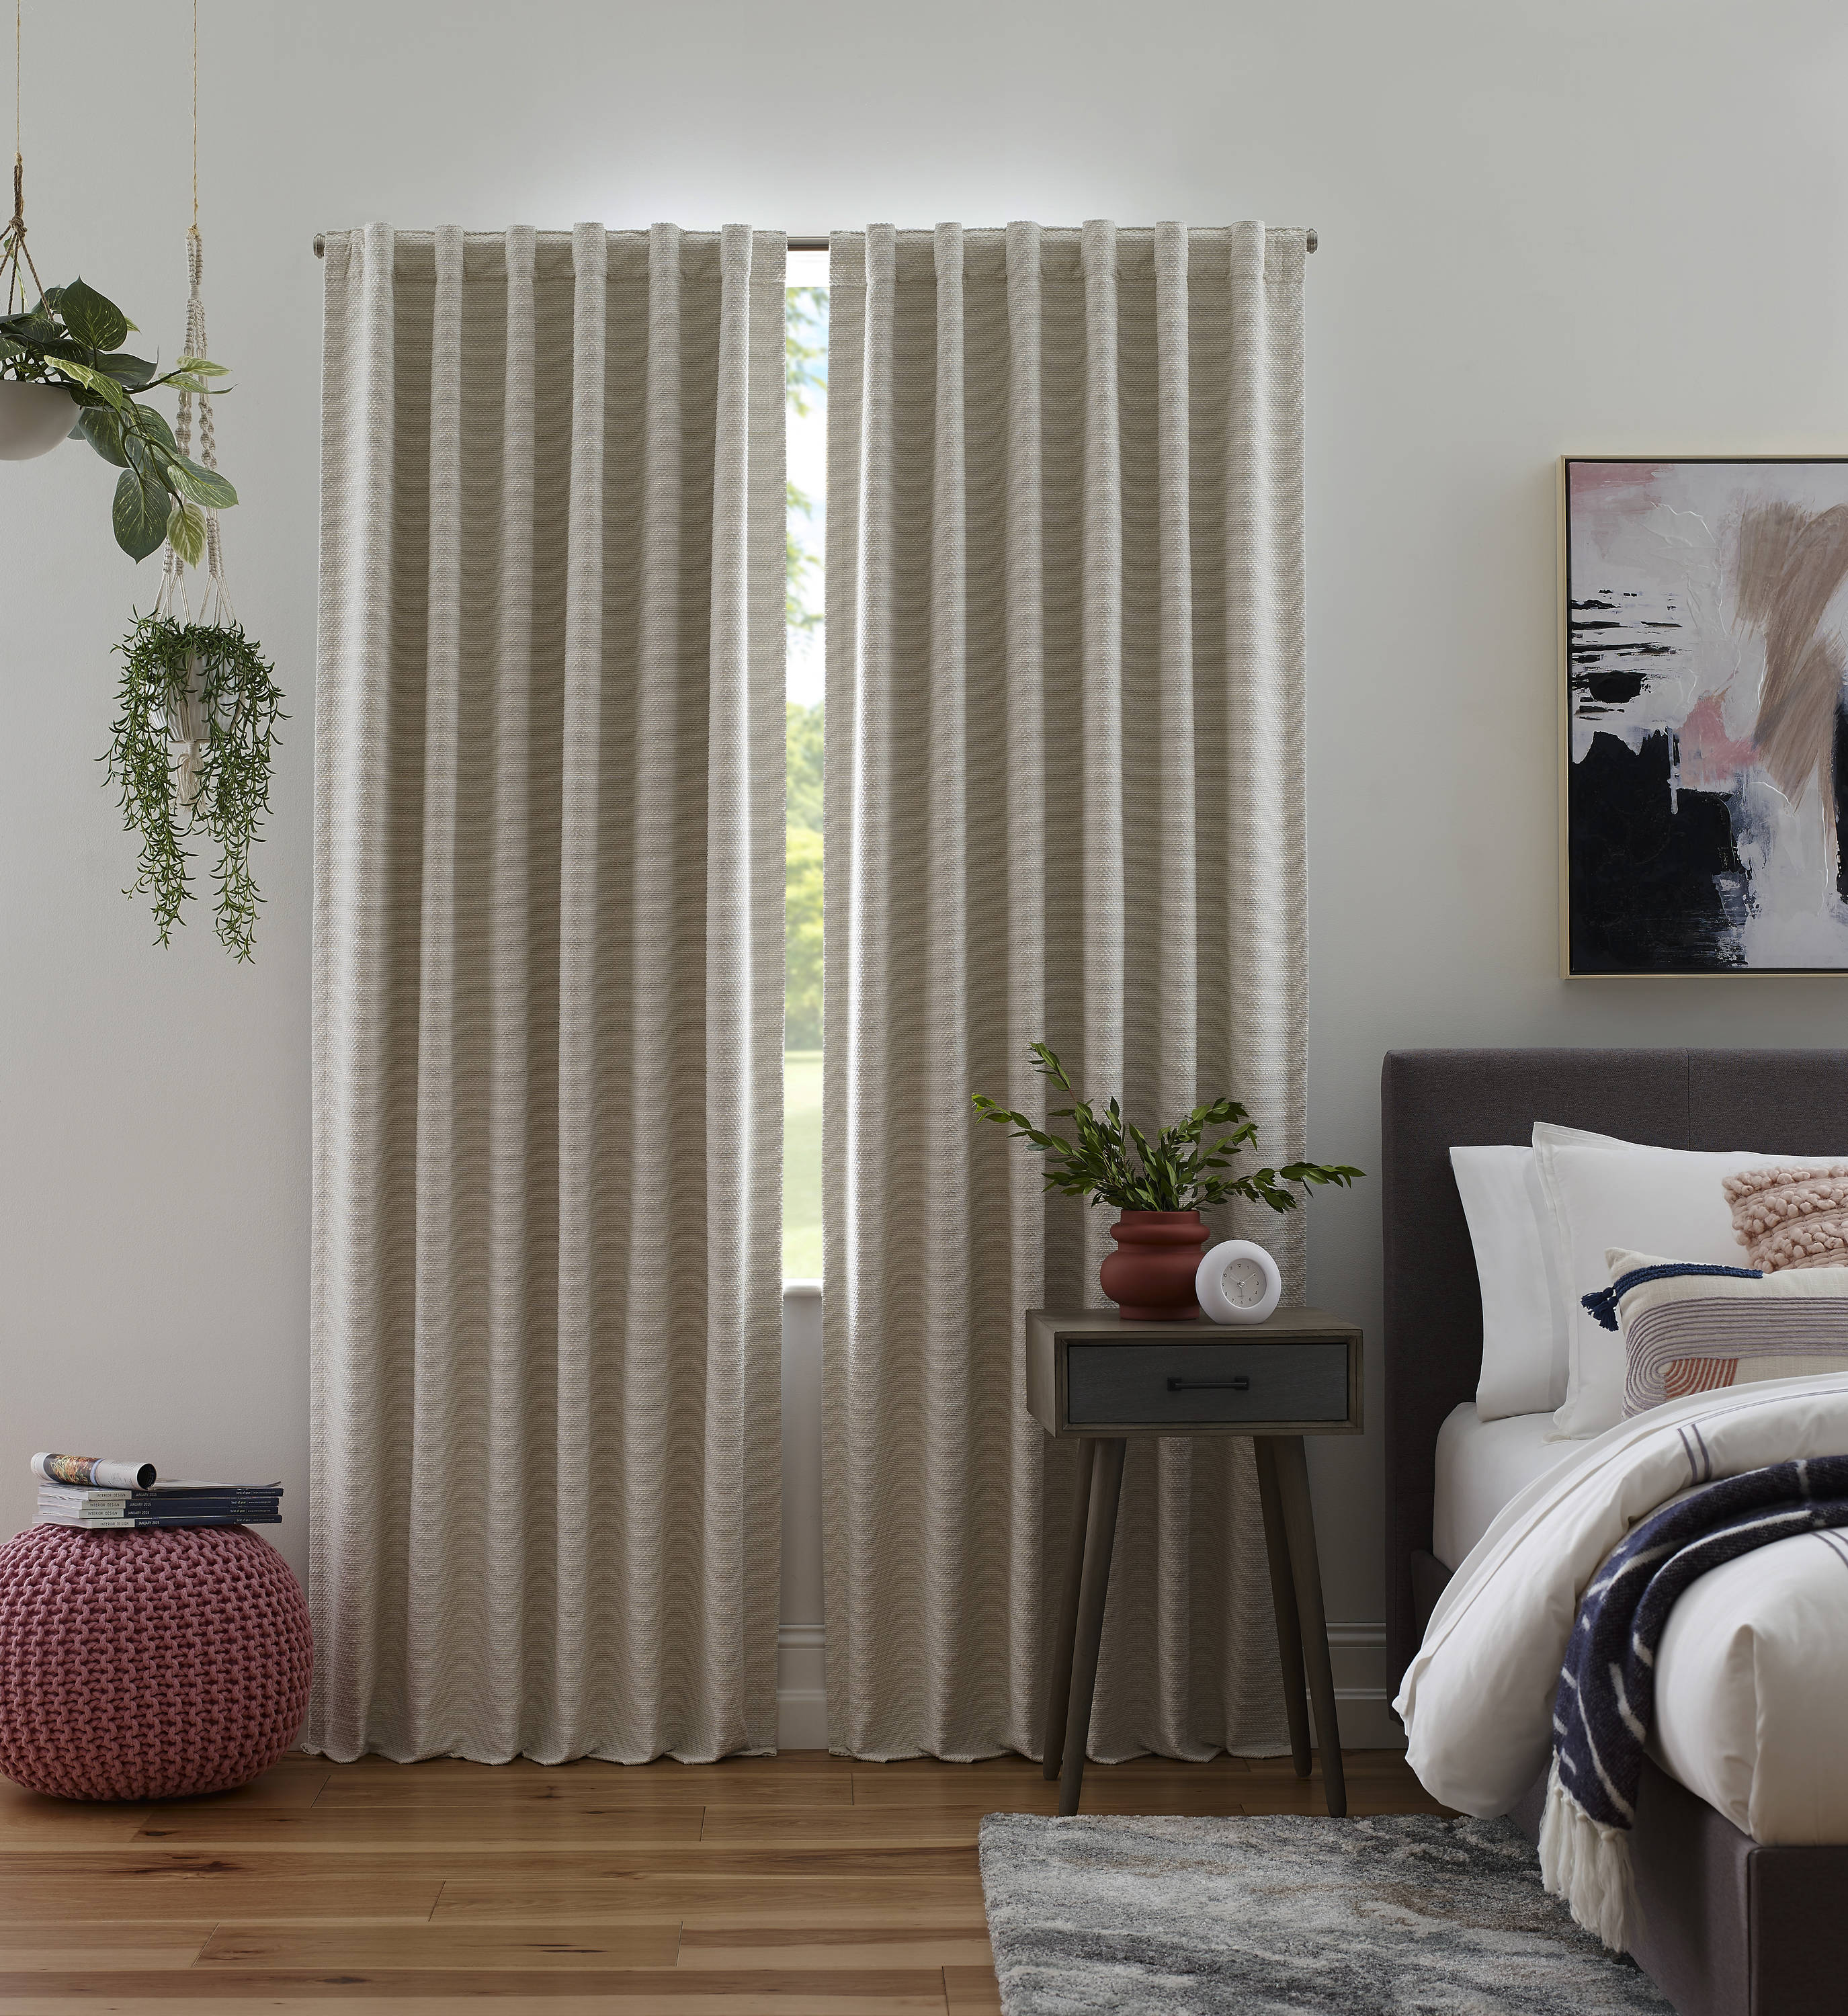 Lined Back department Drapes at the Curtain Ivory Single Origin & 21 Blackout in Tab Panel Thermal Curtains 84-in